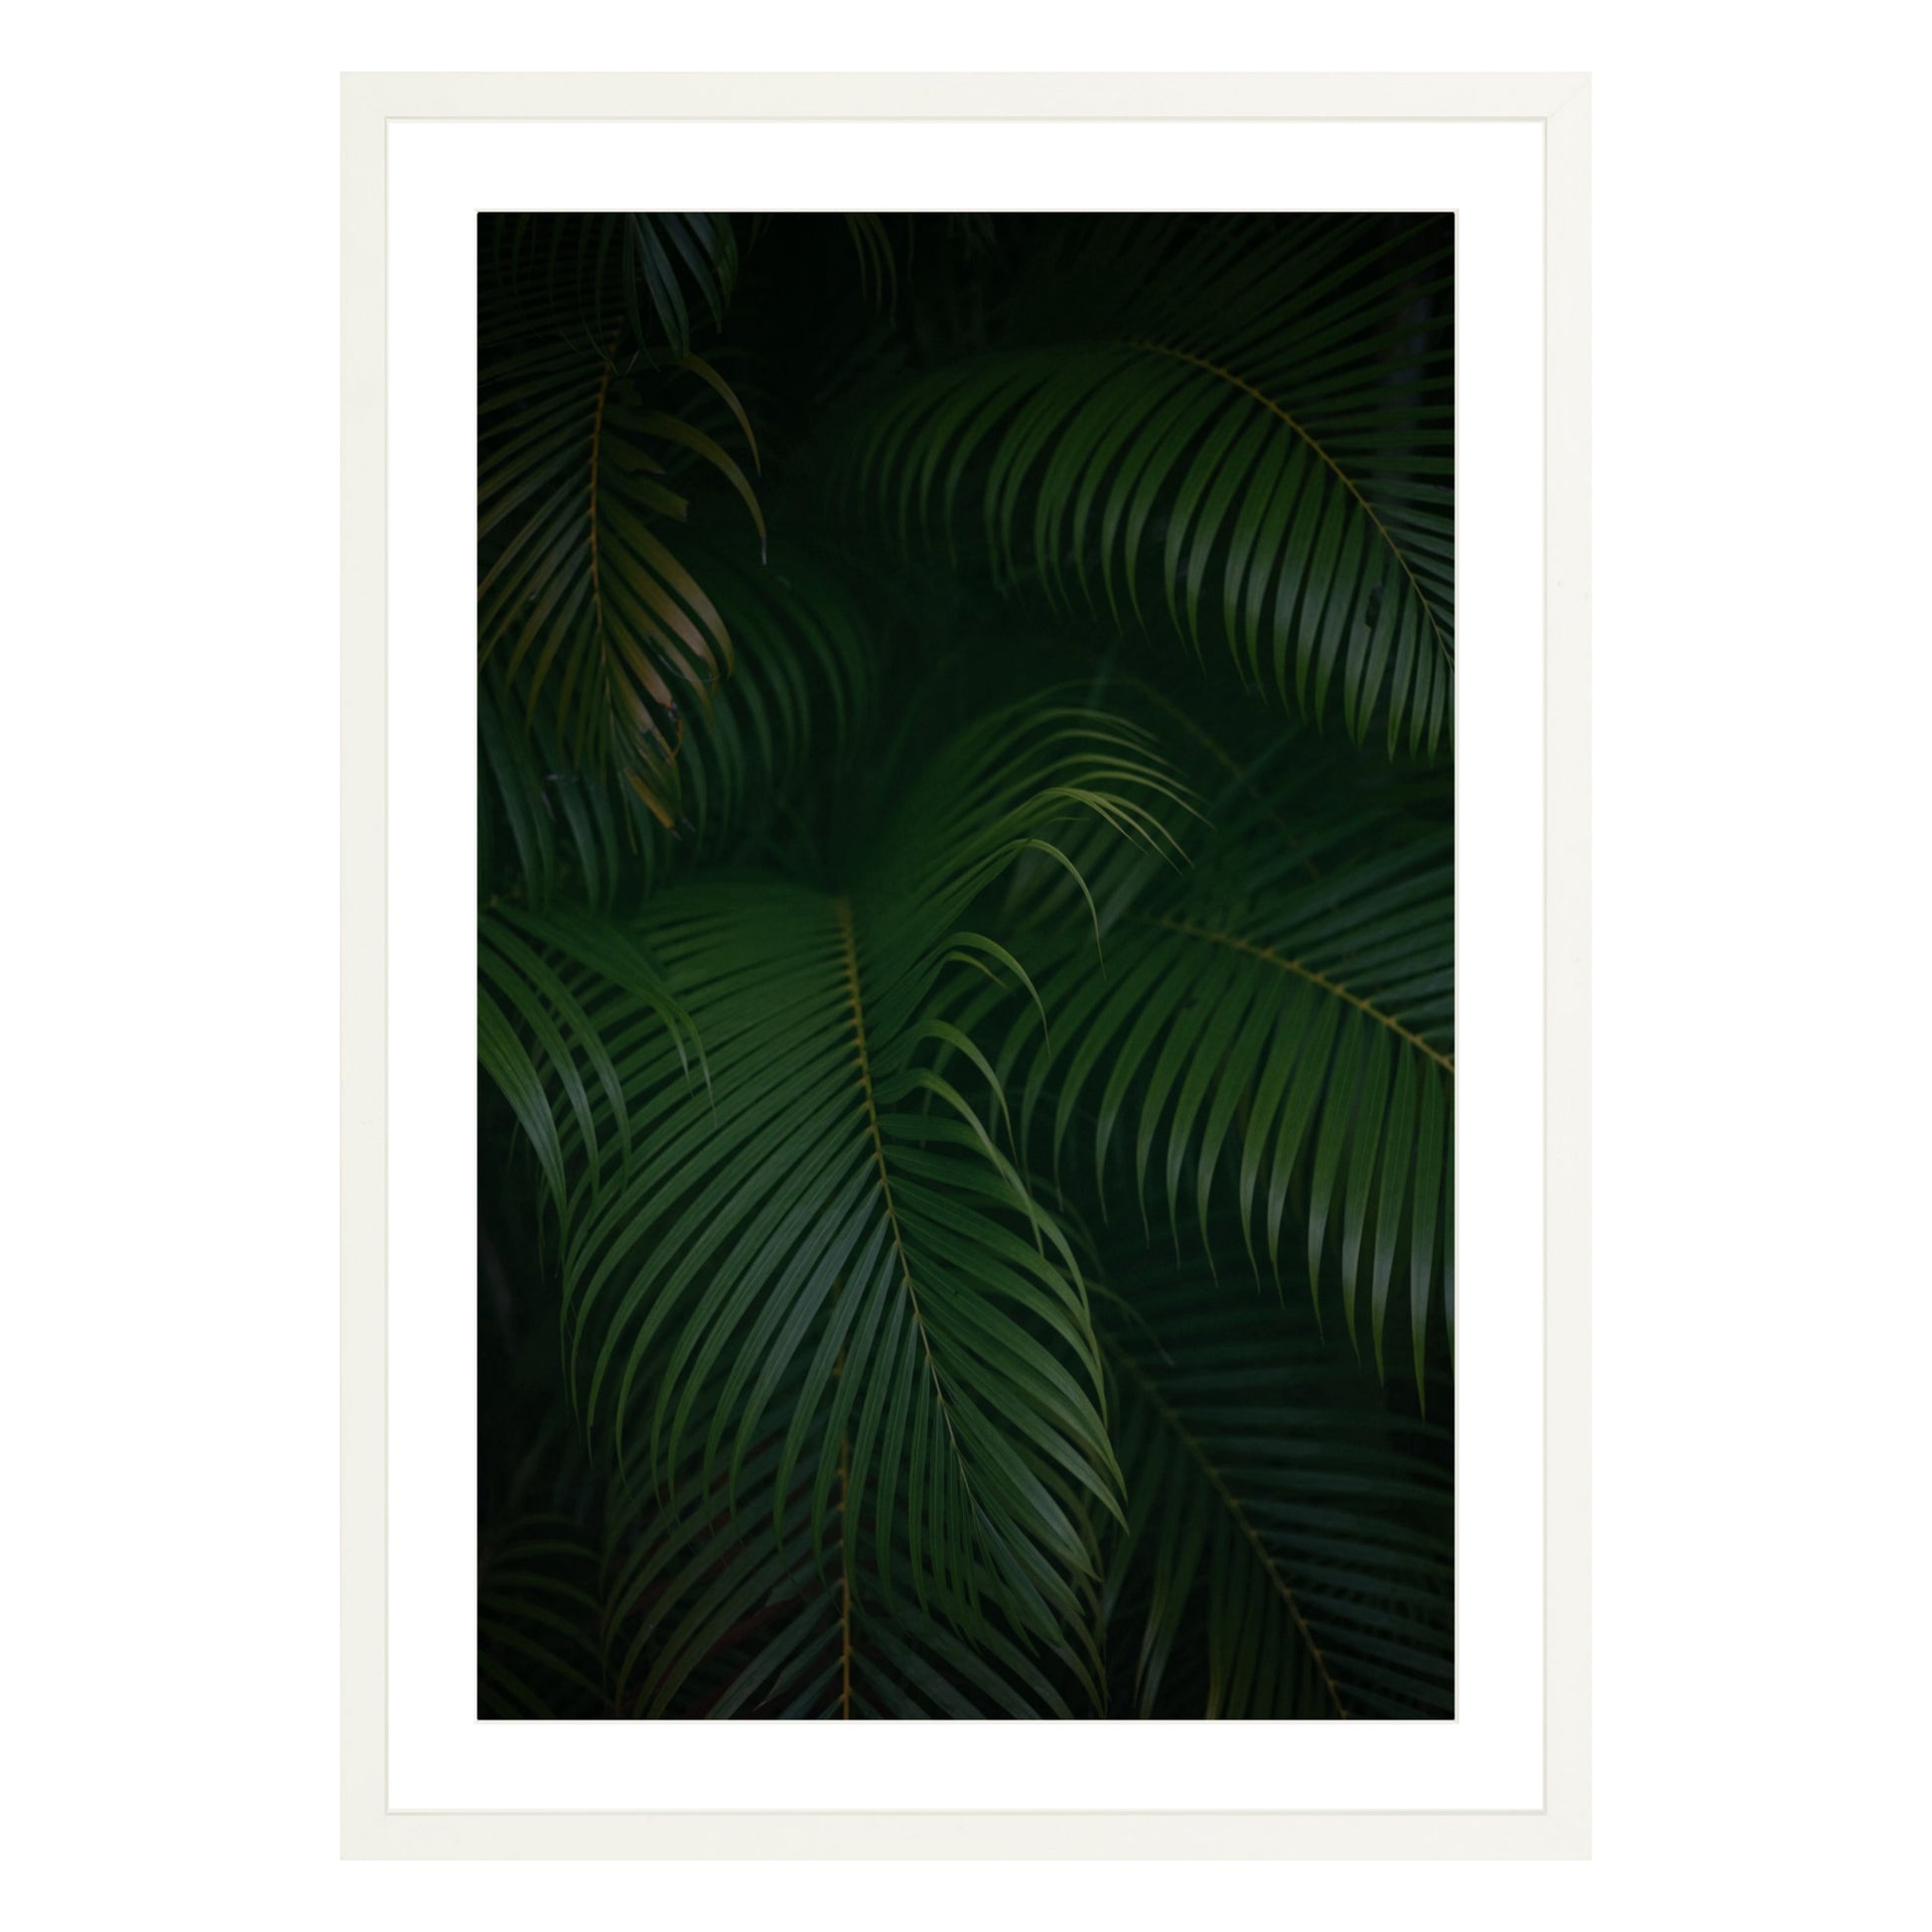 Photograph of palm branches at night in a white wood frame with white mat